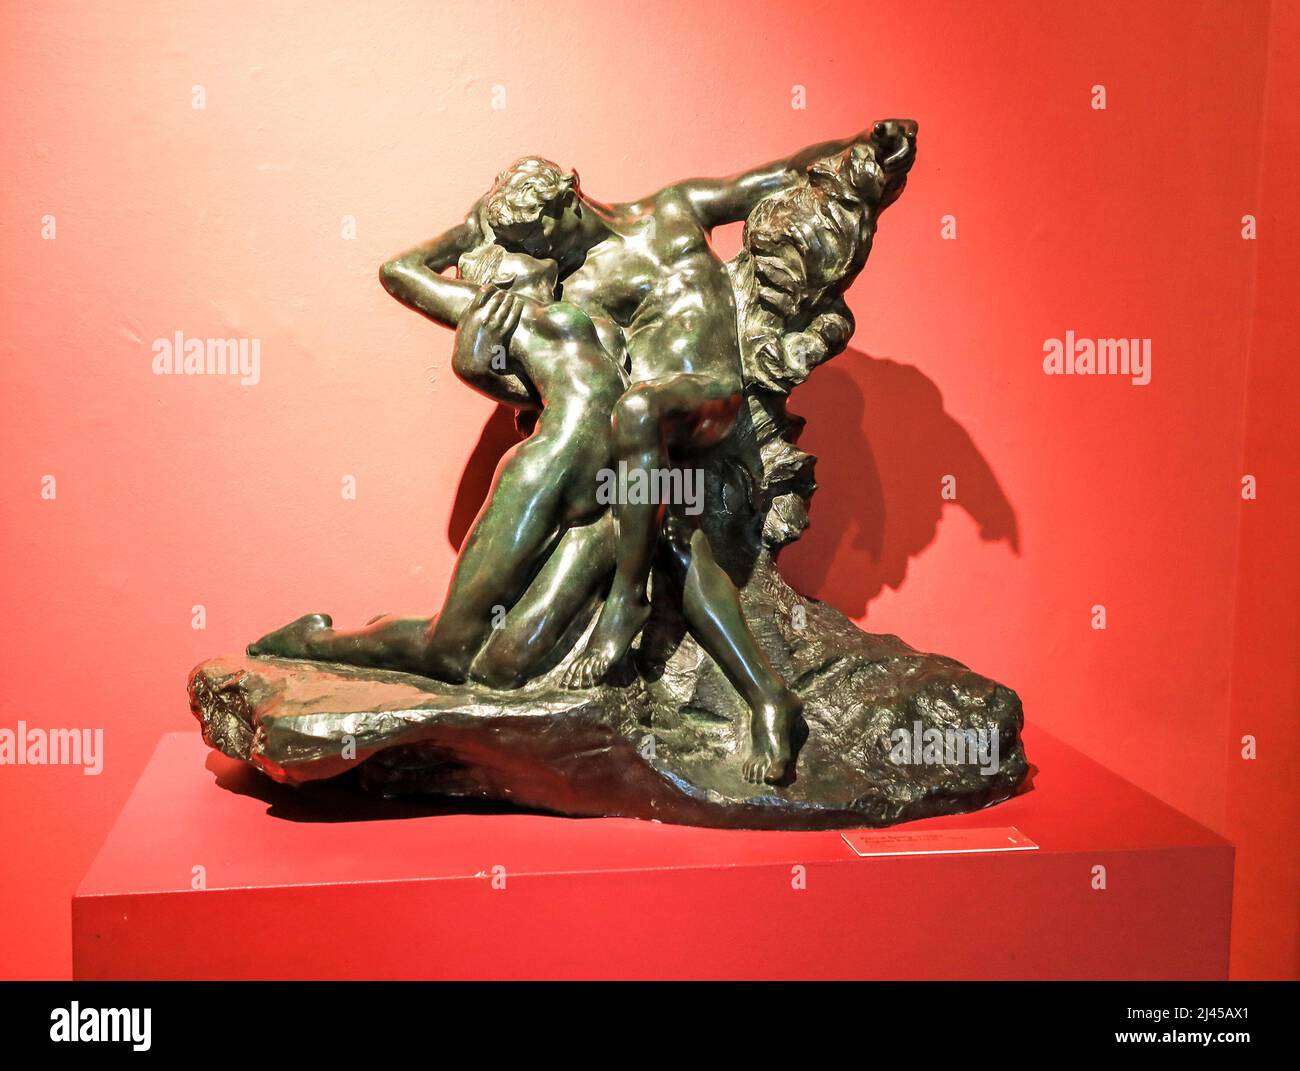 'Eternal Spring' bronze sculpture by sculptor Auguste Rodin on display at the Potteries Museum and Art Gallery, Stoke-on-Trent, Staffs, England, UK Stock Photo